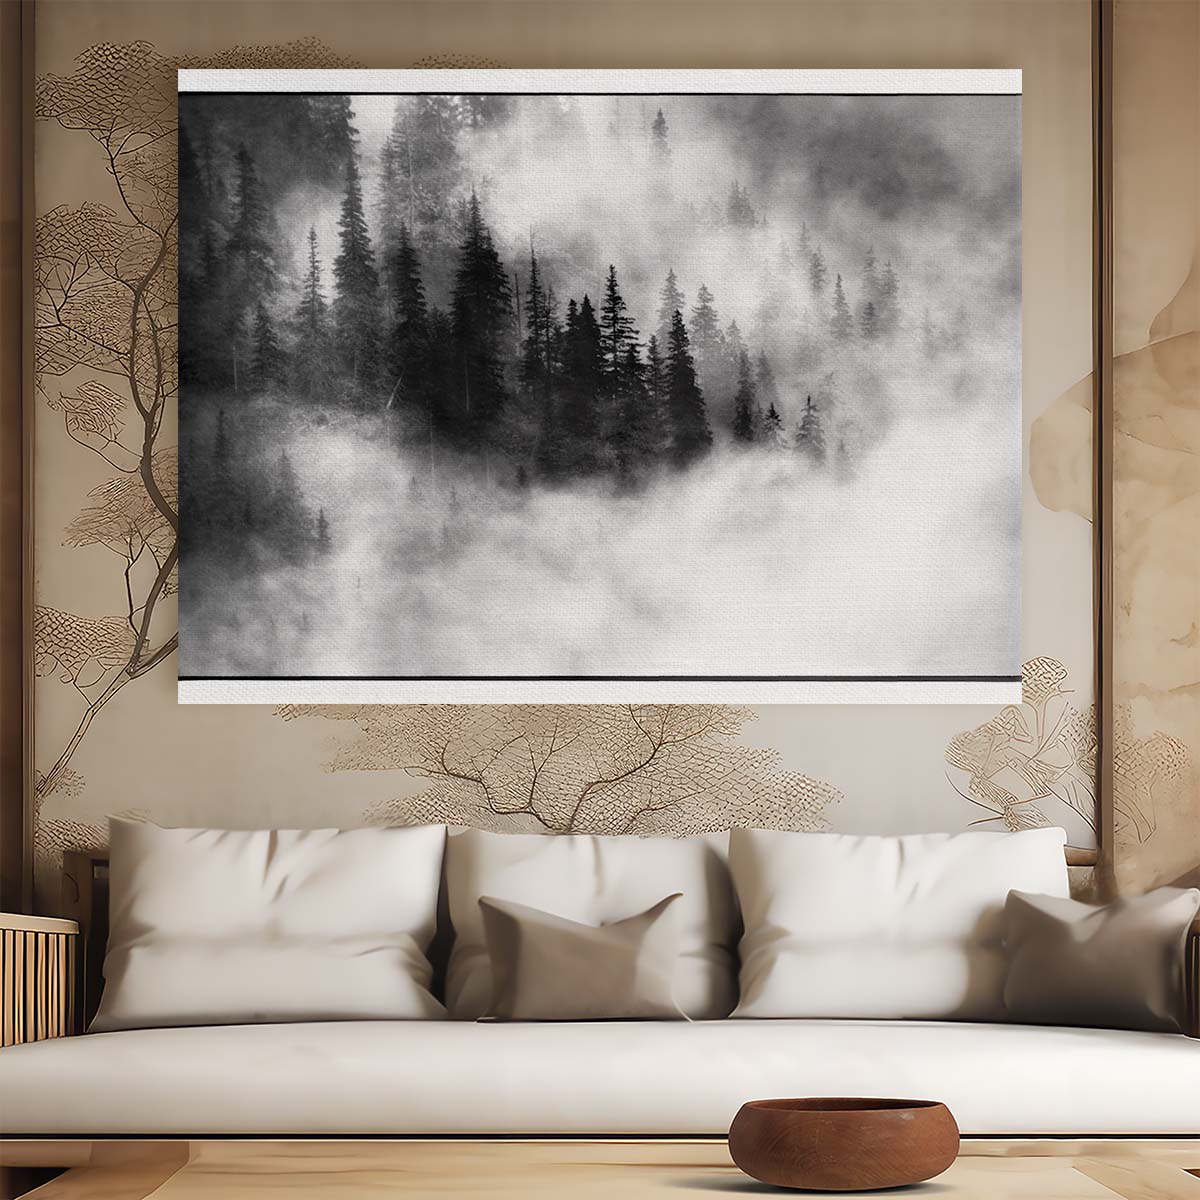 Mystic Foggy Forest Landscape Monochrome Wall Art by Luxuriance Designs. Made in USA.